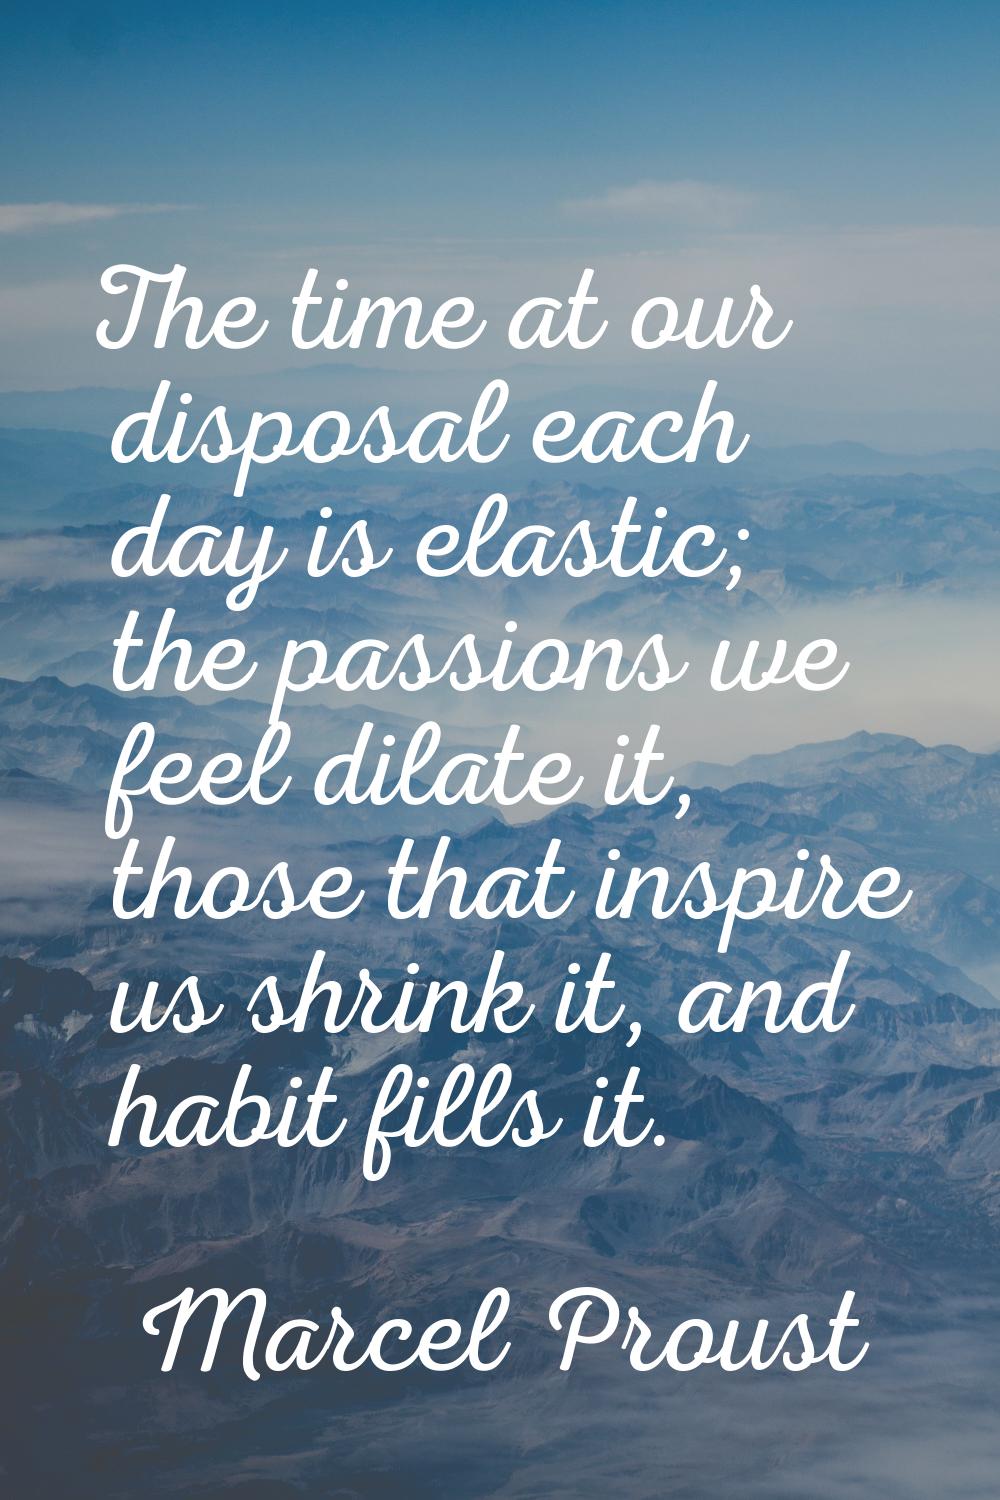 The time at our disposal each day is elastic; the passions we feel dilate it, those that inspire us